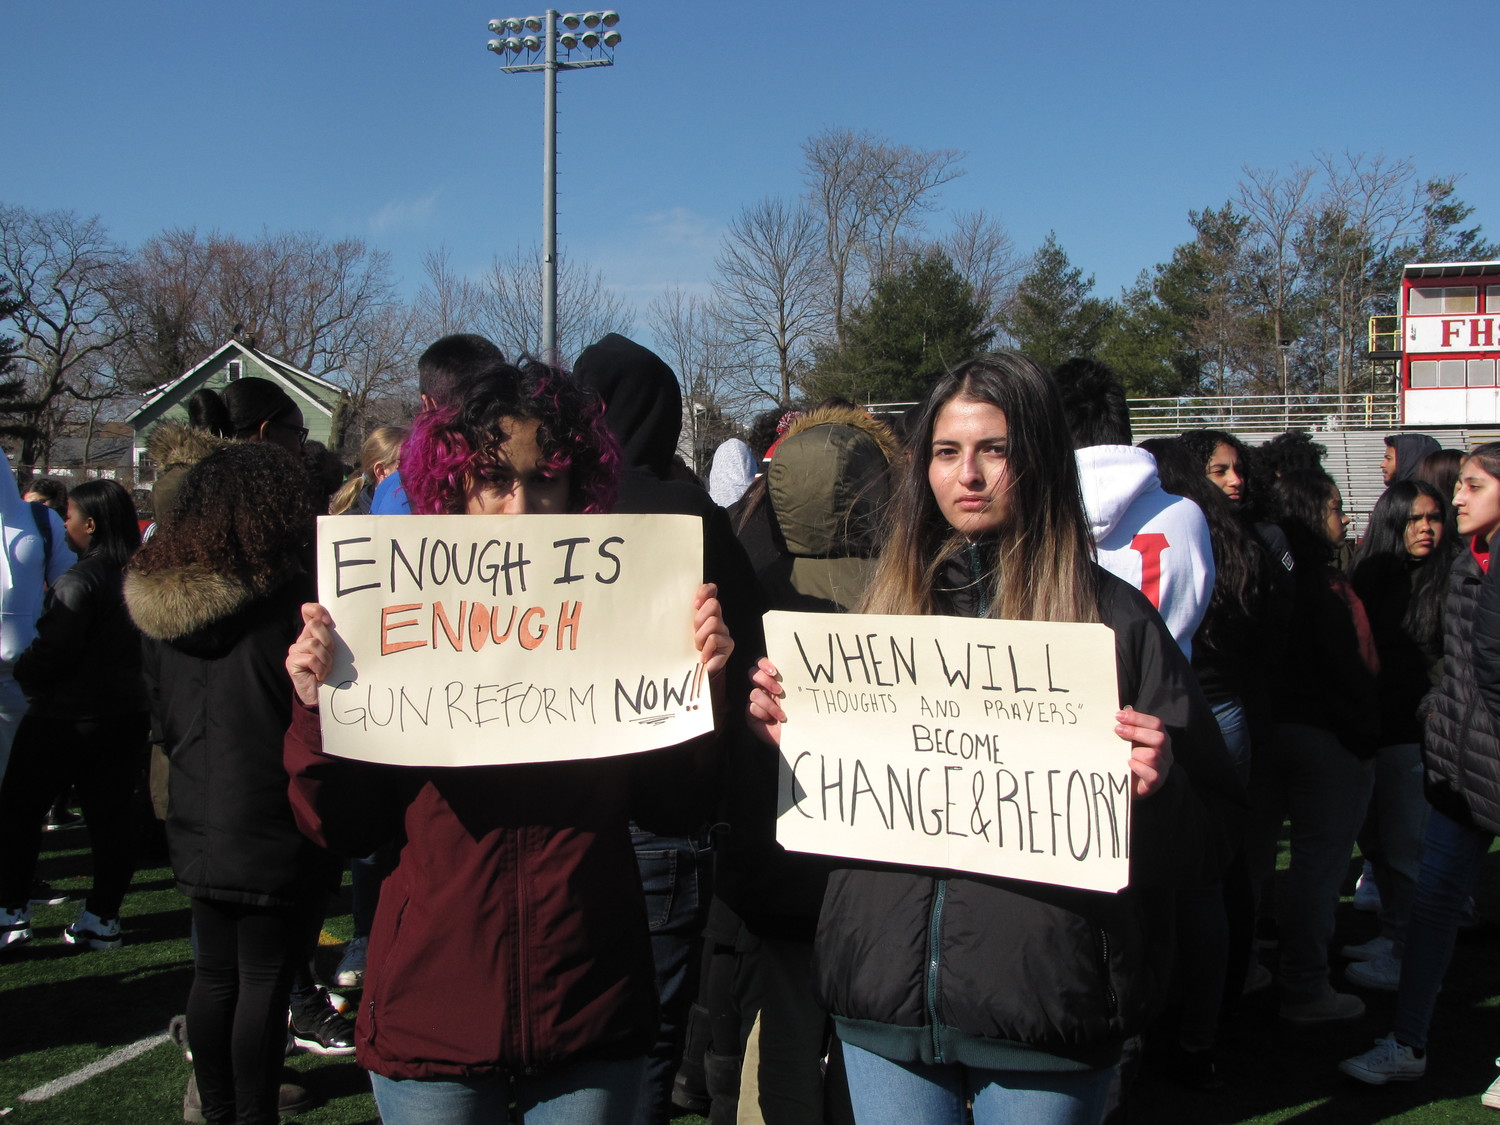 Junior, Leah Hochman, left and senior, Michelle Luongo, right, held hand-made signs to spread awareness.